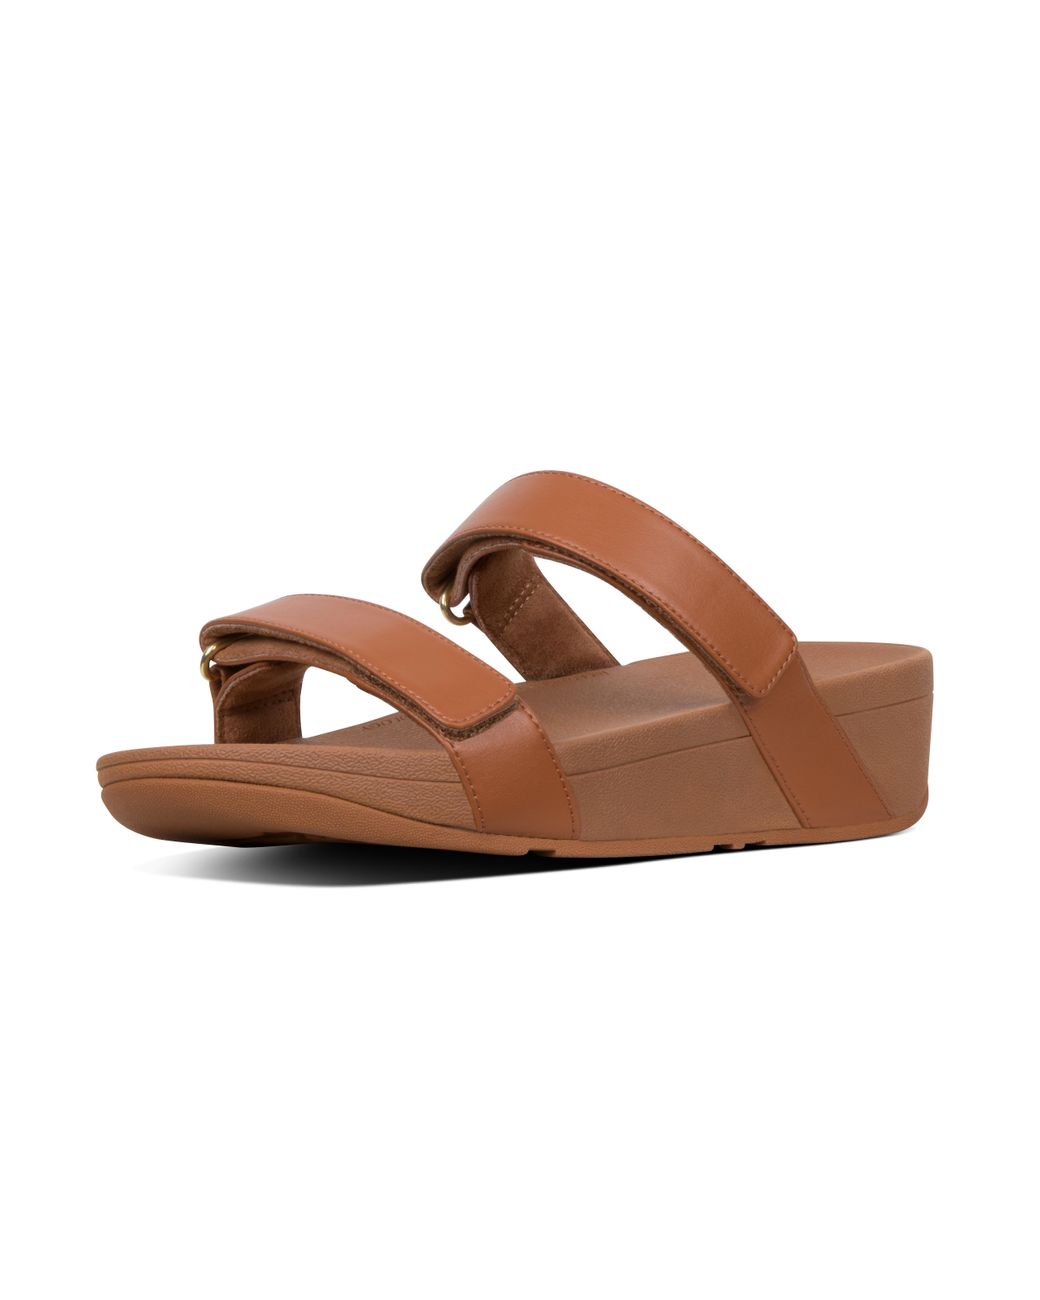 fitflops tan leather